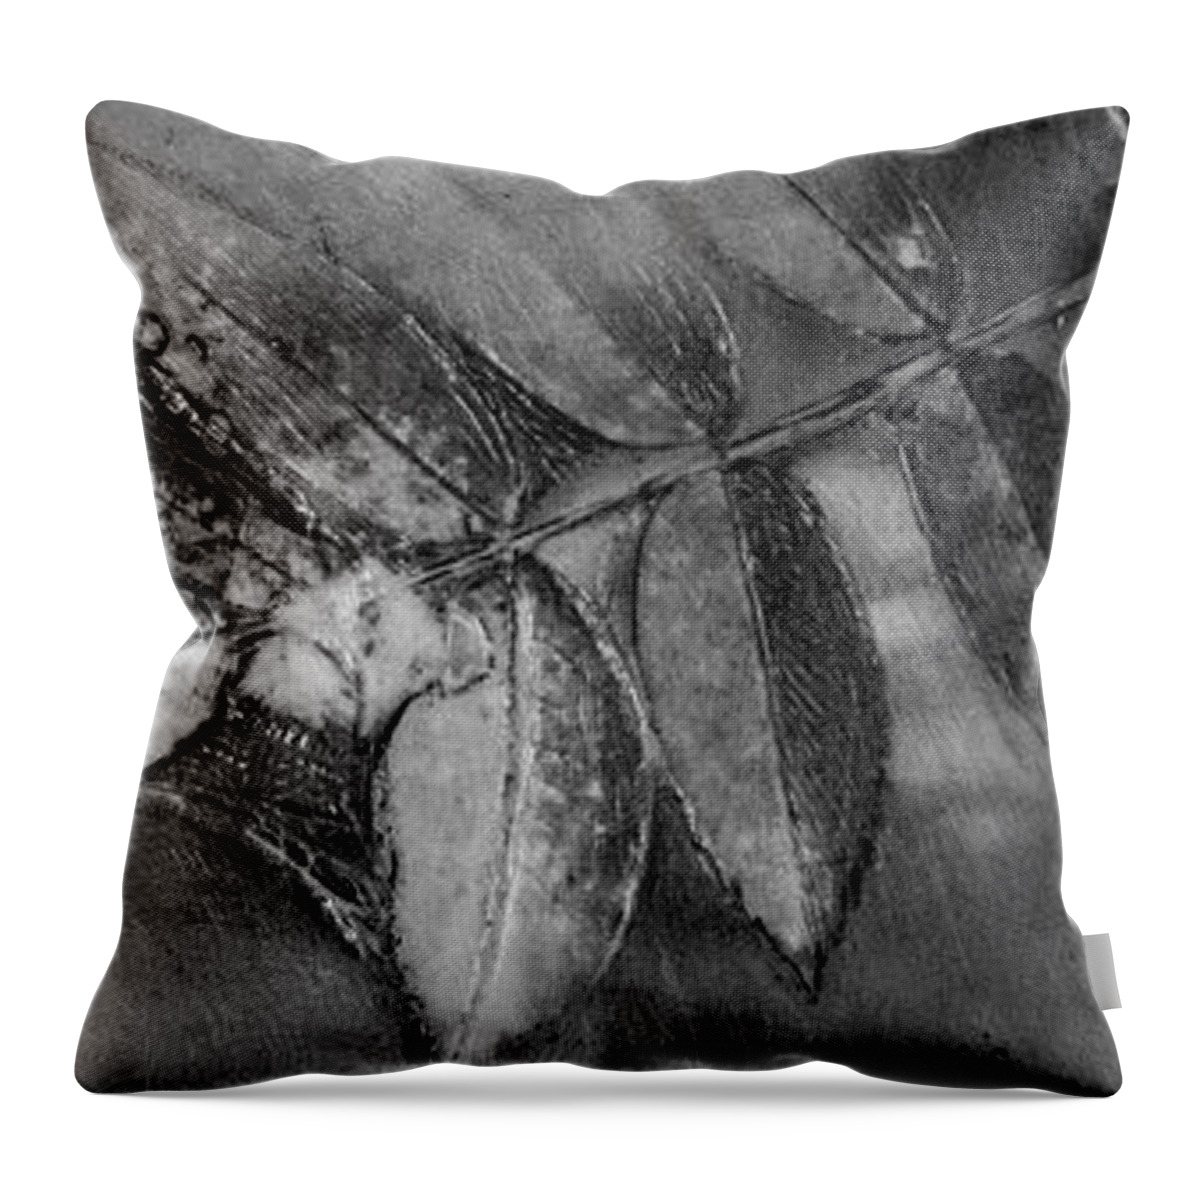 Encaustic Throw Pillow featuring the mixed media Ornate Foliage by Roseanne Jones